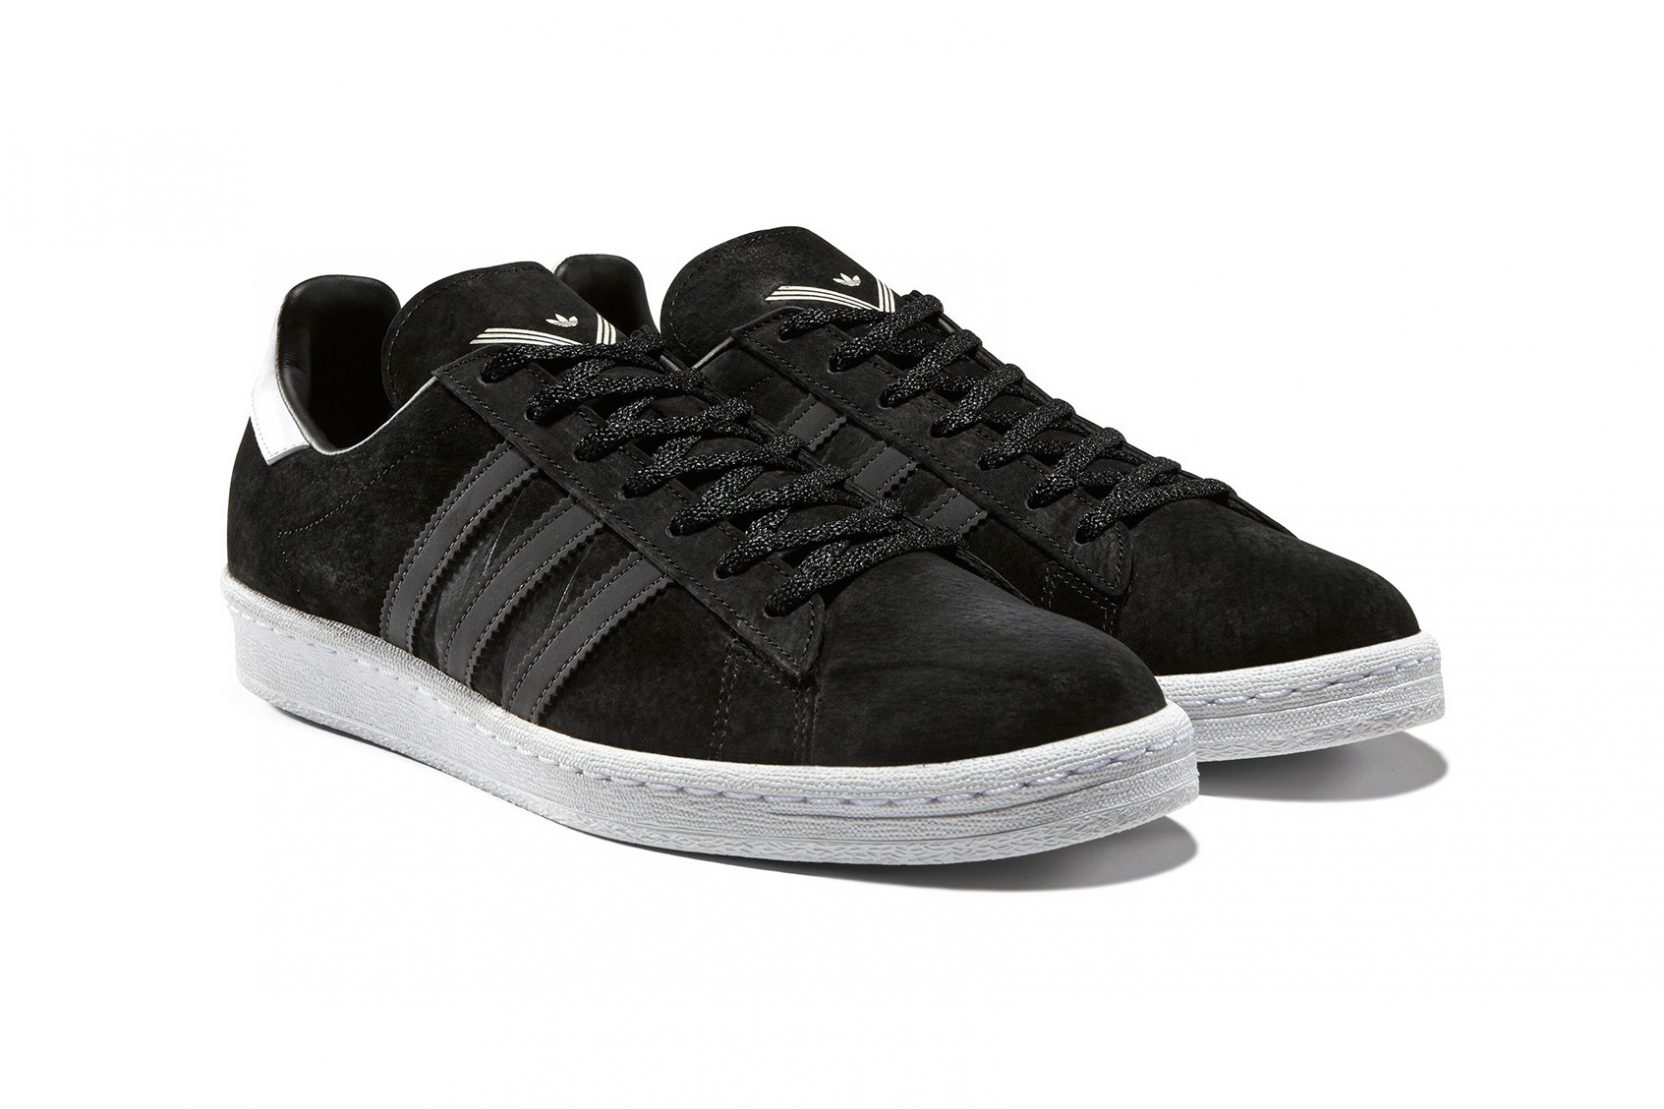 White Mountaineering x Adidas Spring Collection 4